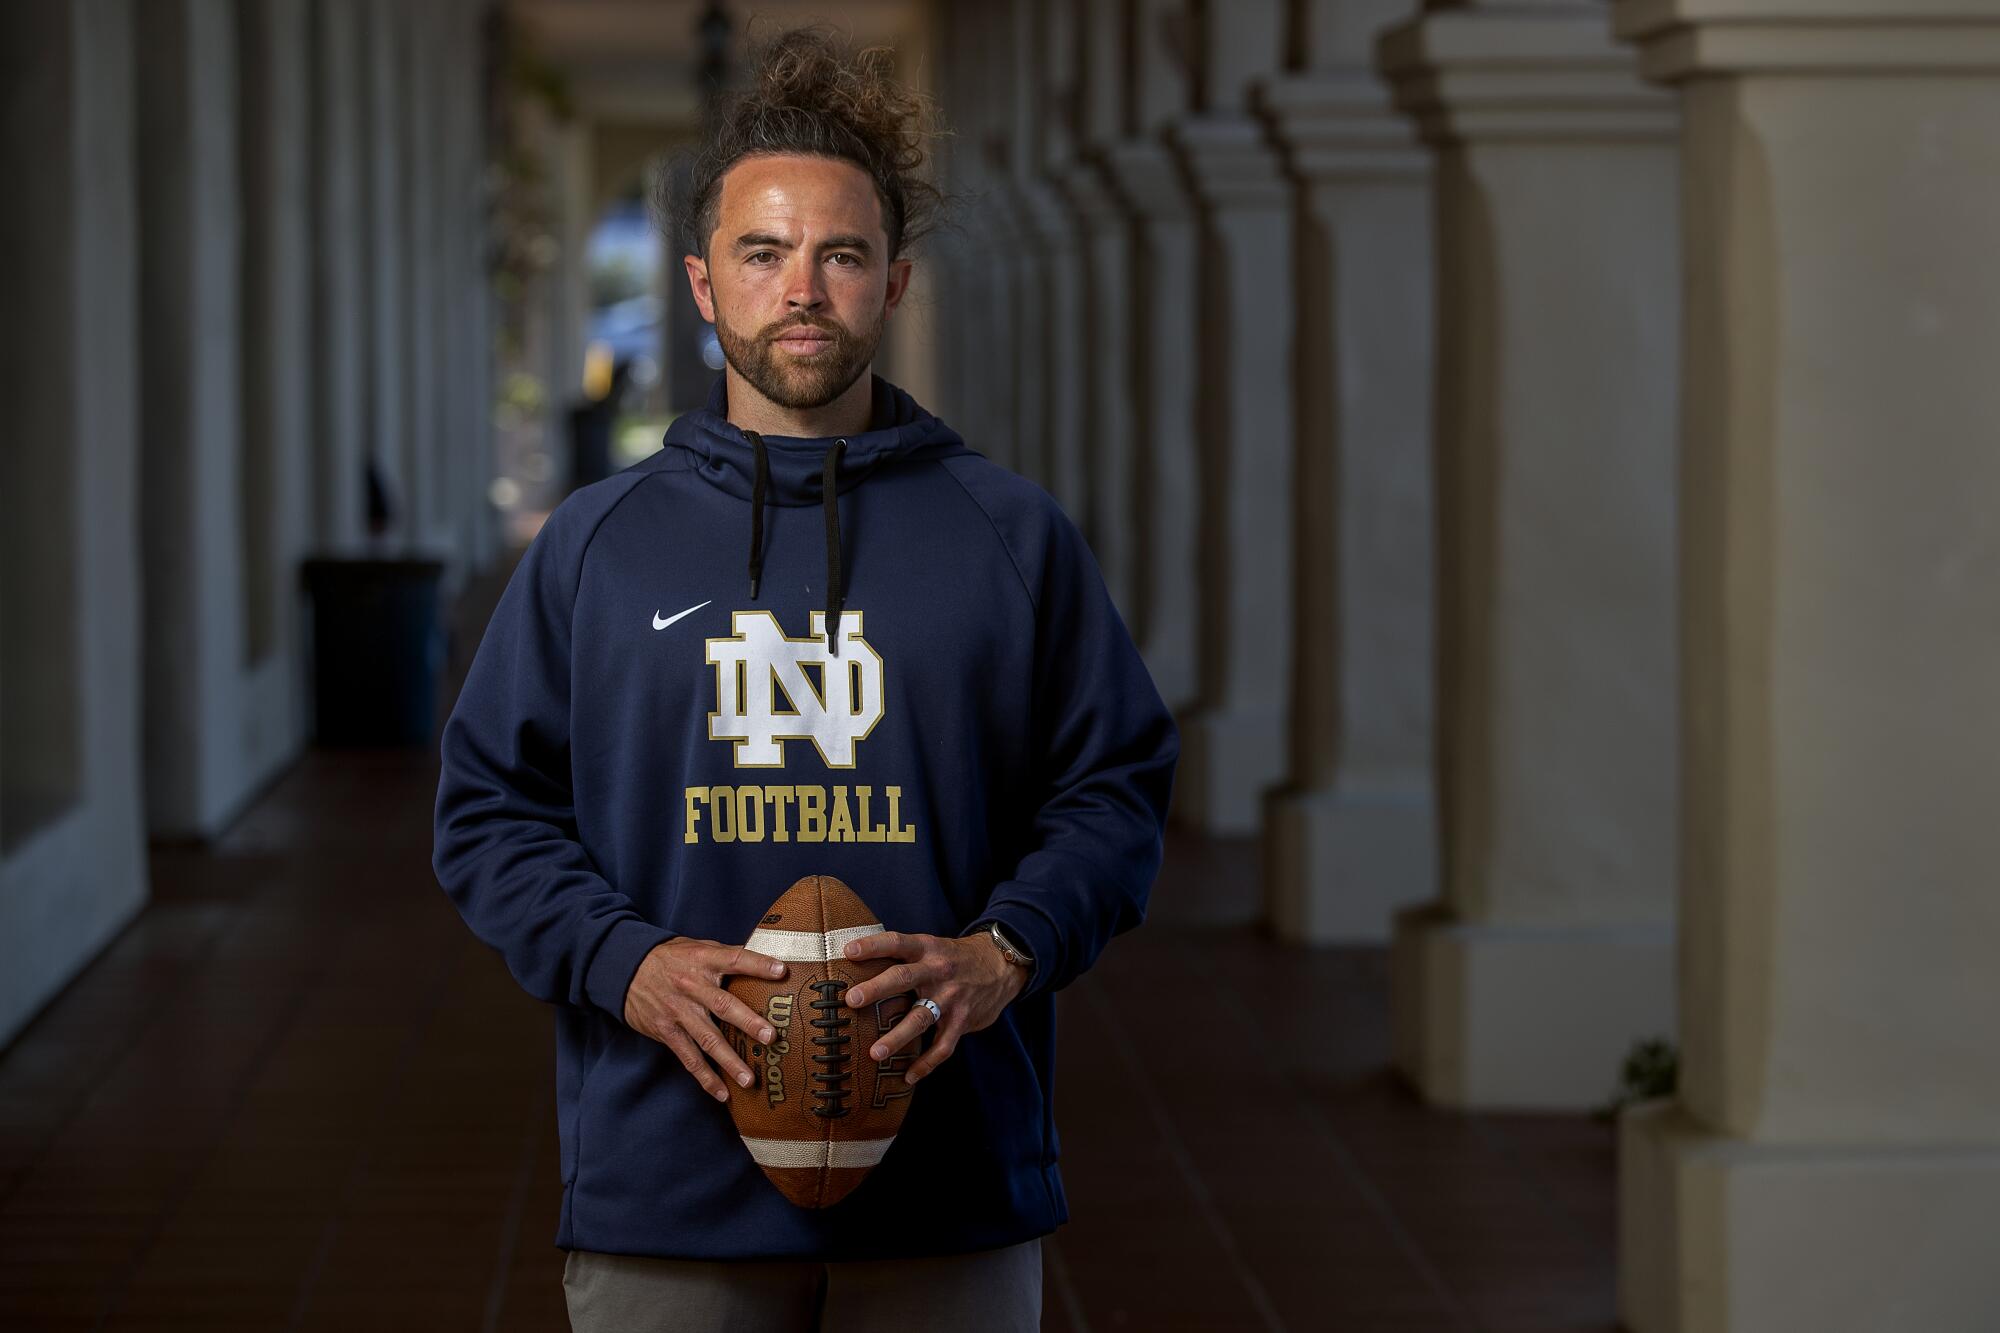 Notre Dame High football coach Evan Yabu poses for a photo on campus.